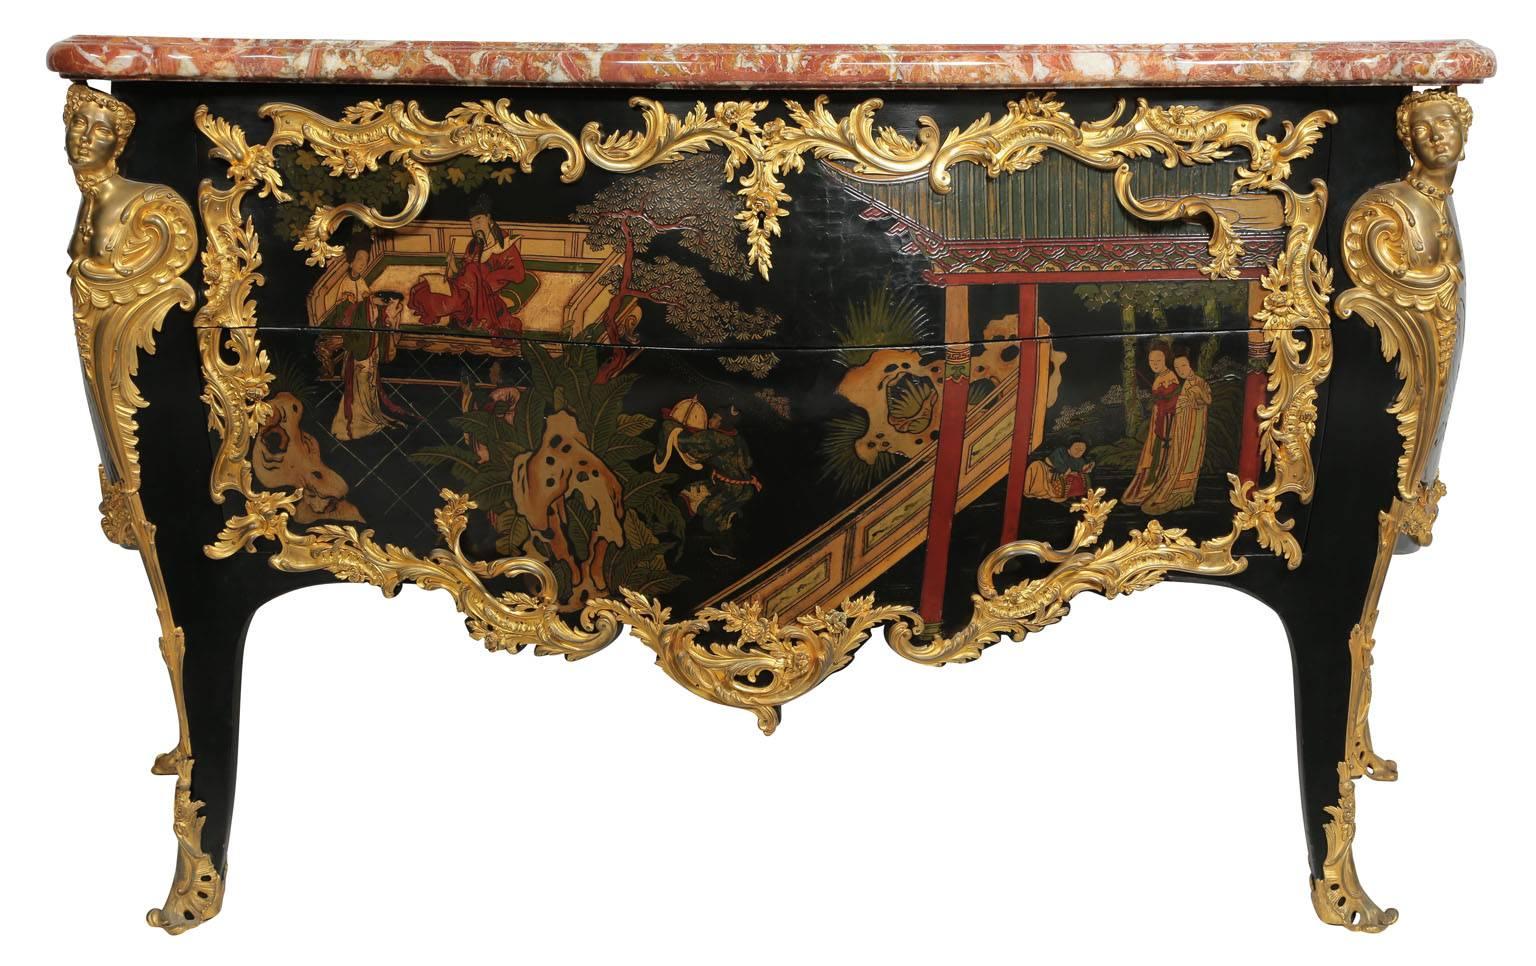 An extraordinary fine and Palatial French Louis XV style 19th century ebonized lacquered Chinoiserie style and finely chased gilt bronze-mounted two drawer Serpentine commode with marble top, in the manner of Jacques Dubois (mai^tre 1742),